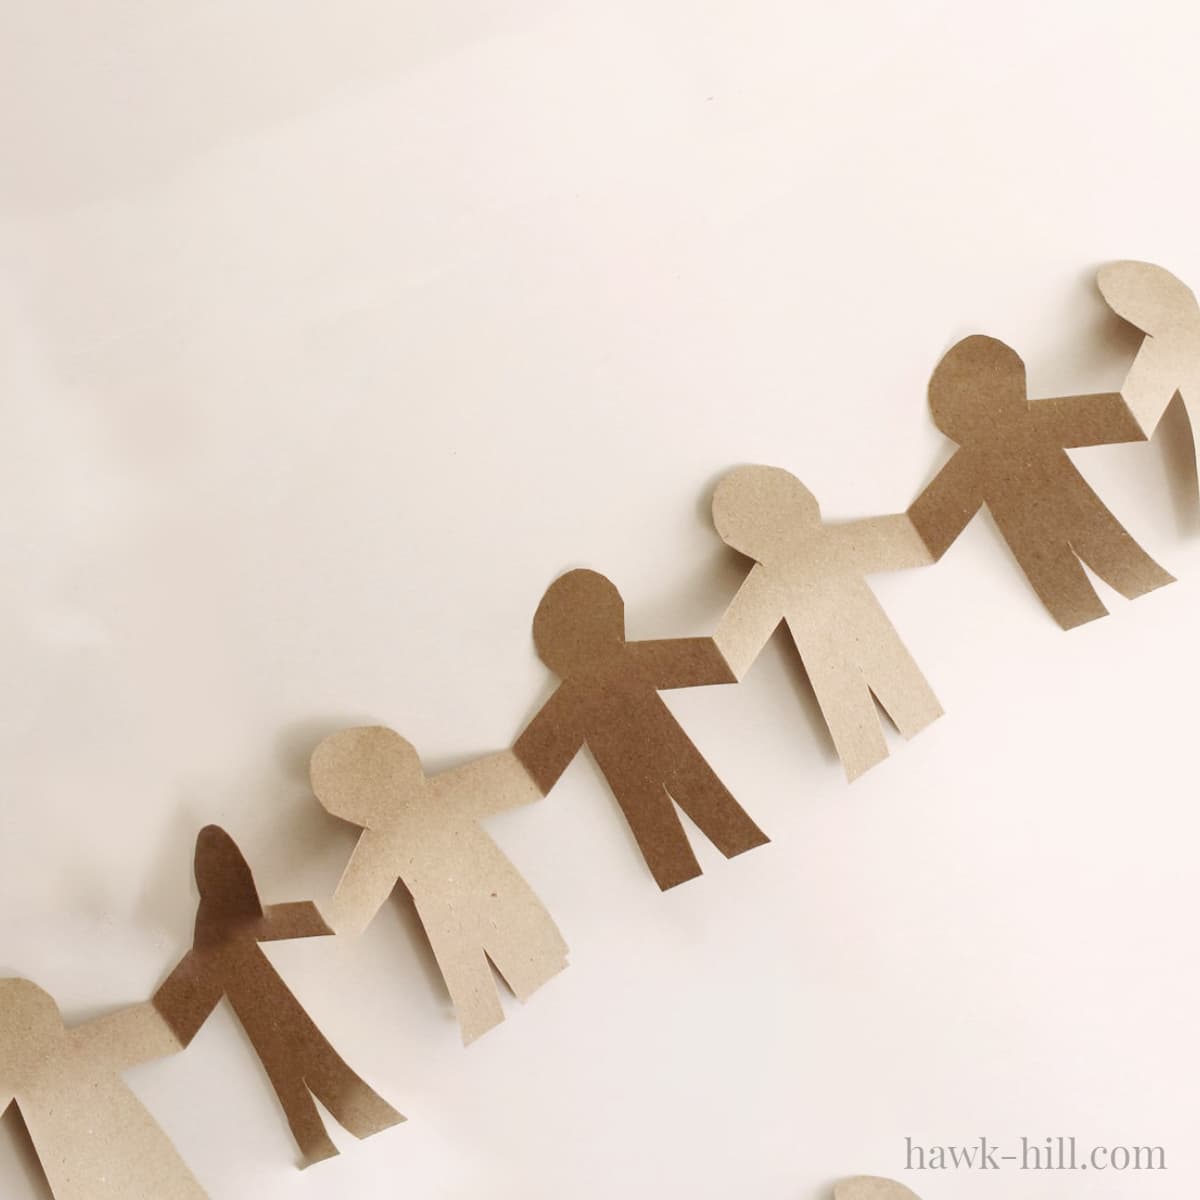 Simple Paper Doll Pattern and Instructions